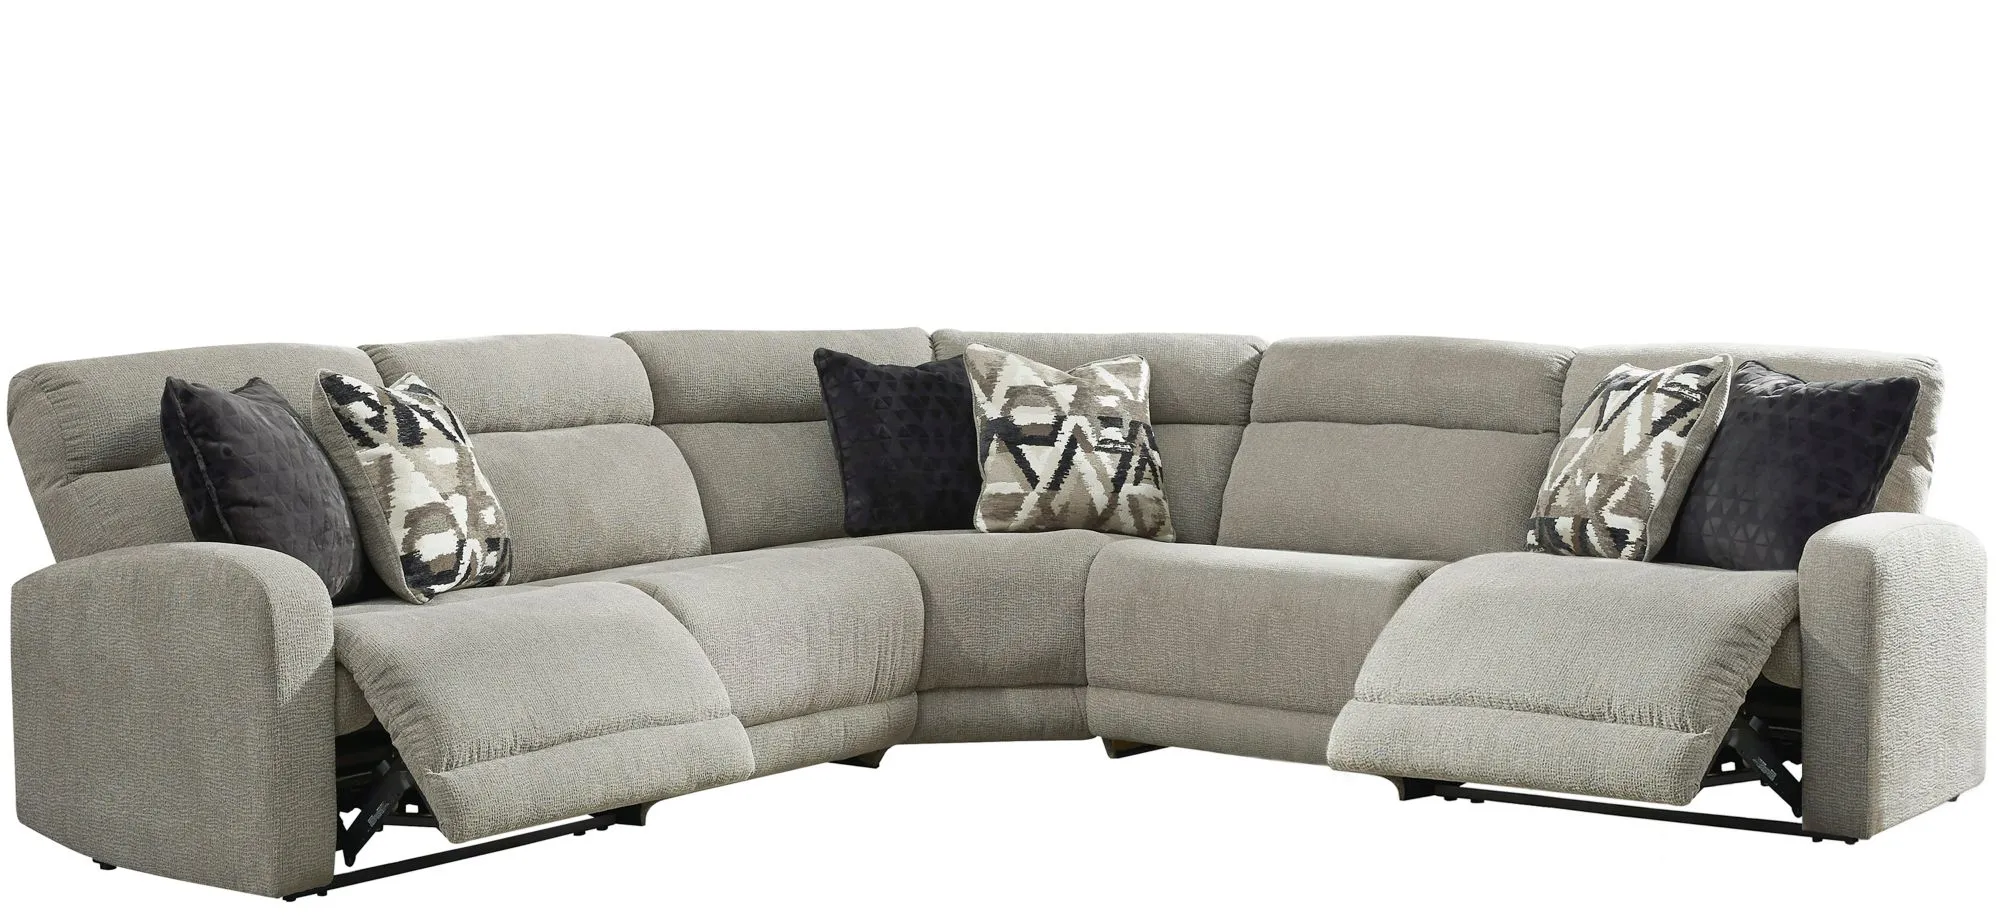 Colleyville 5-pc. Sectional in Stone by Ashley Furniture